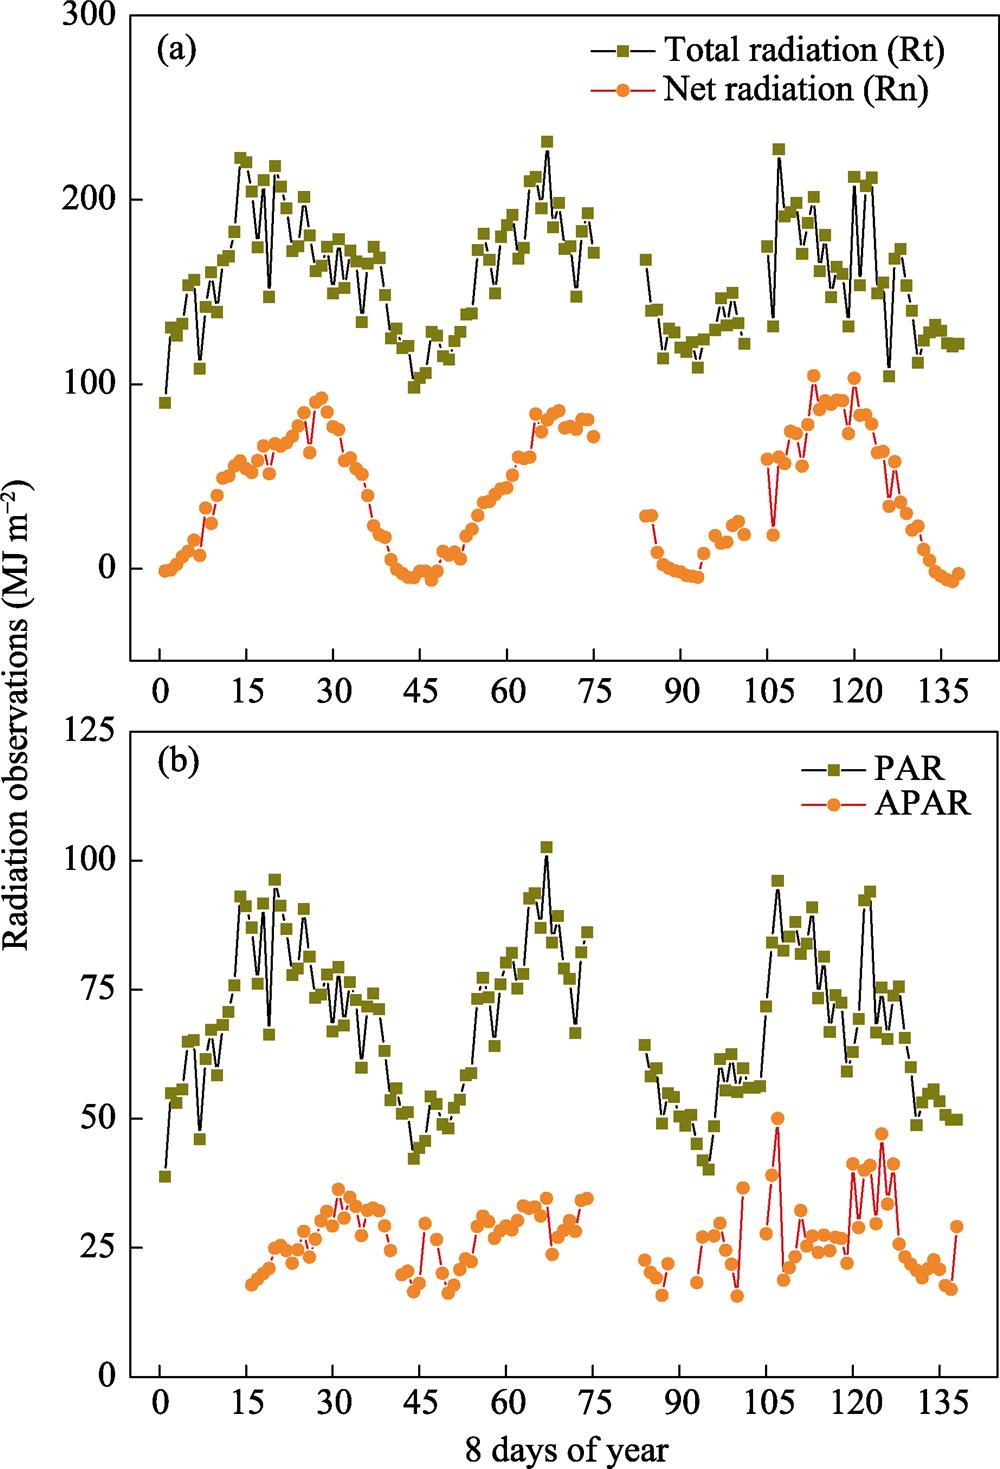 The 8-day step radiation observations during the years 2009 to 2011. (a) Total radiation and net radiation. (b) Photosynthetically active radiation (PAR) and the absorbed PAR by canopy (APAR).